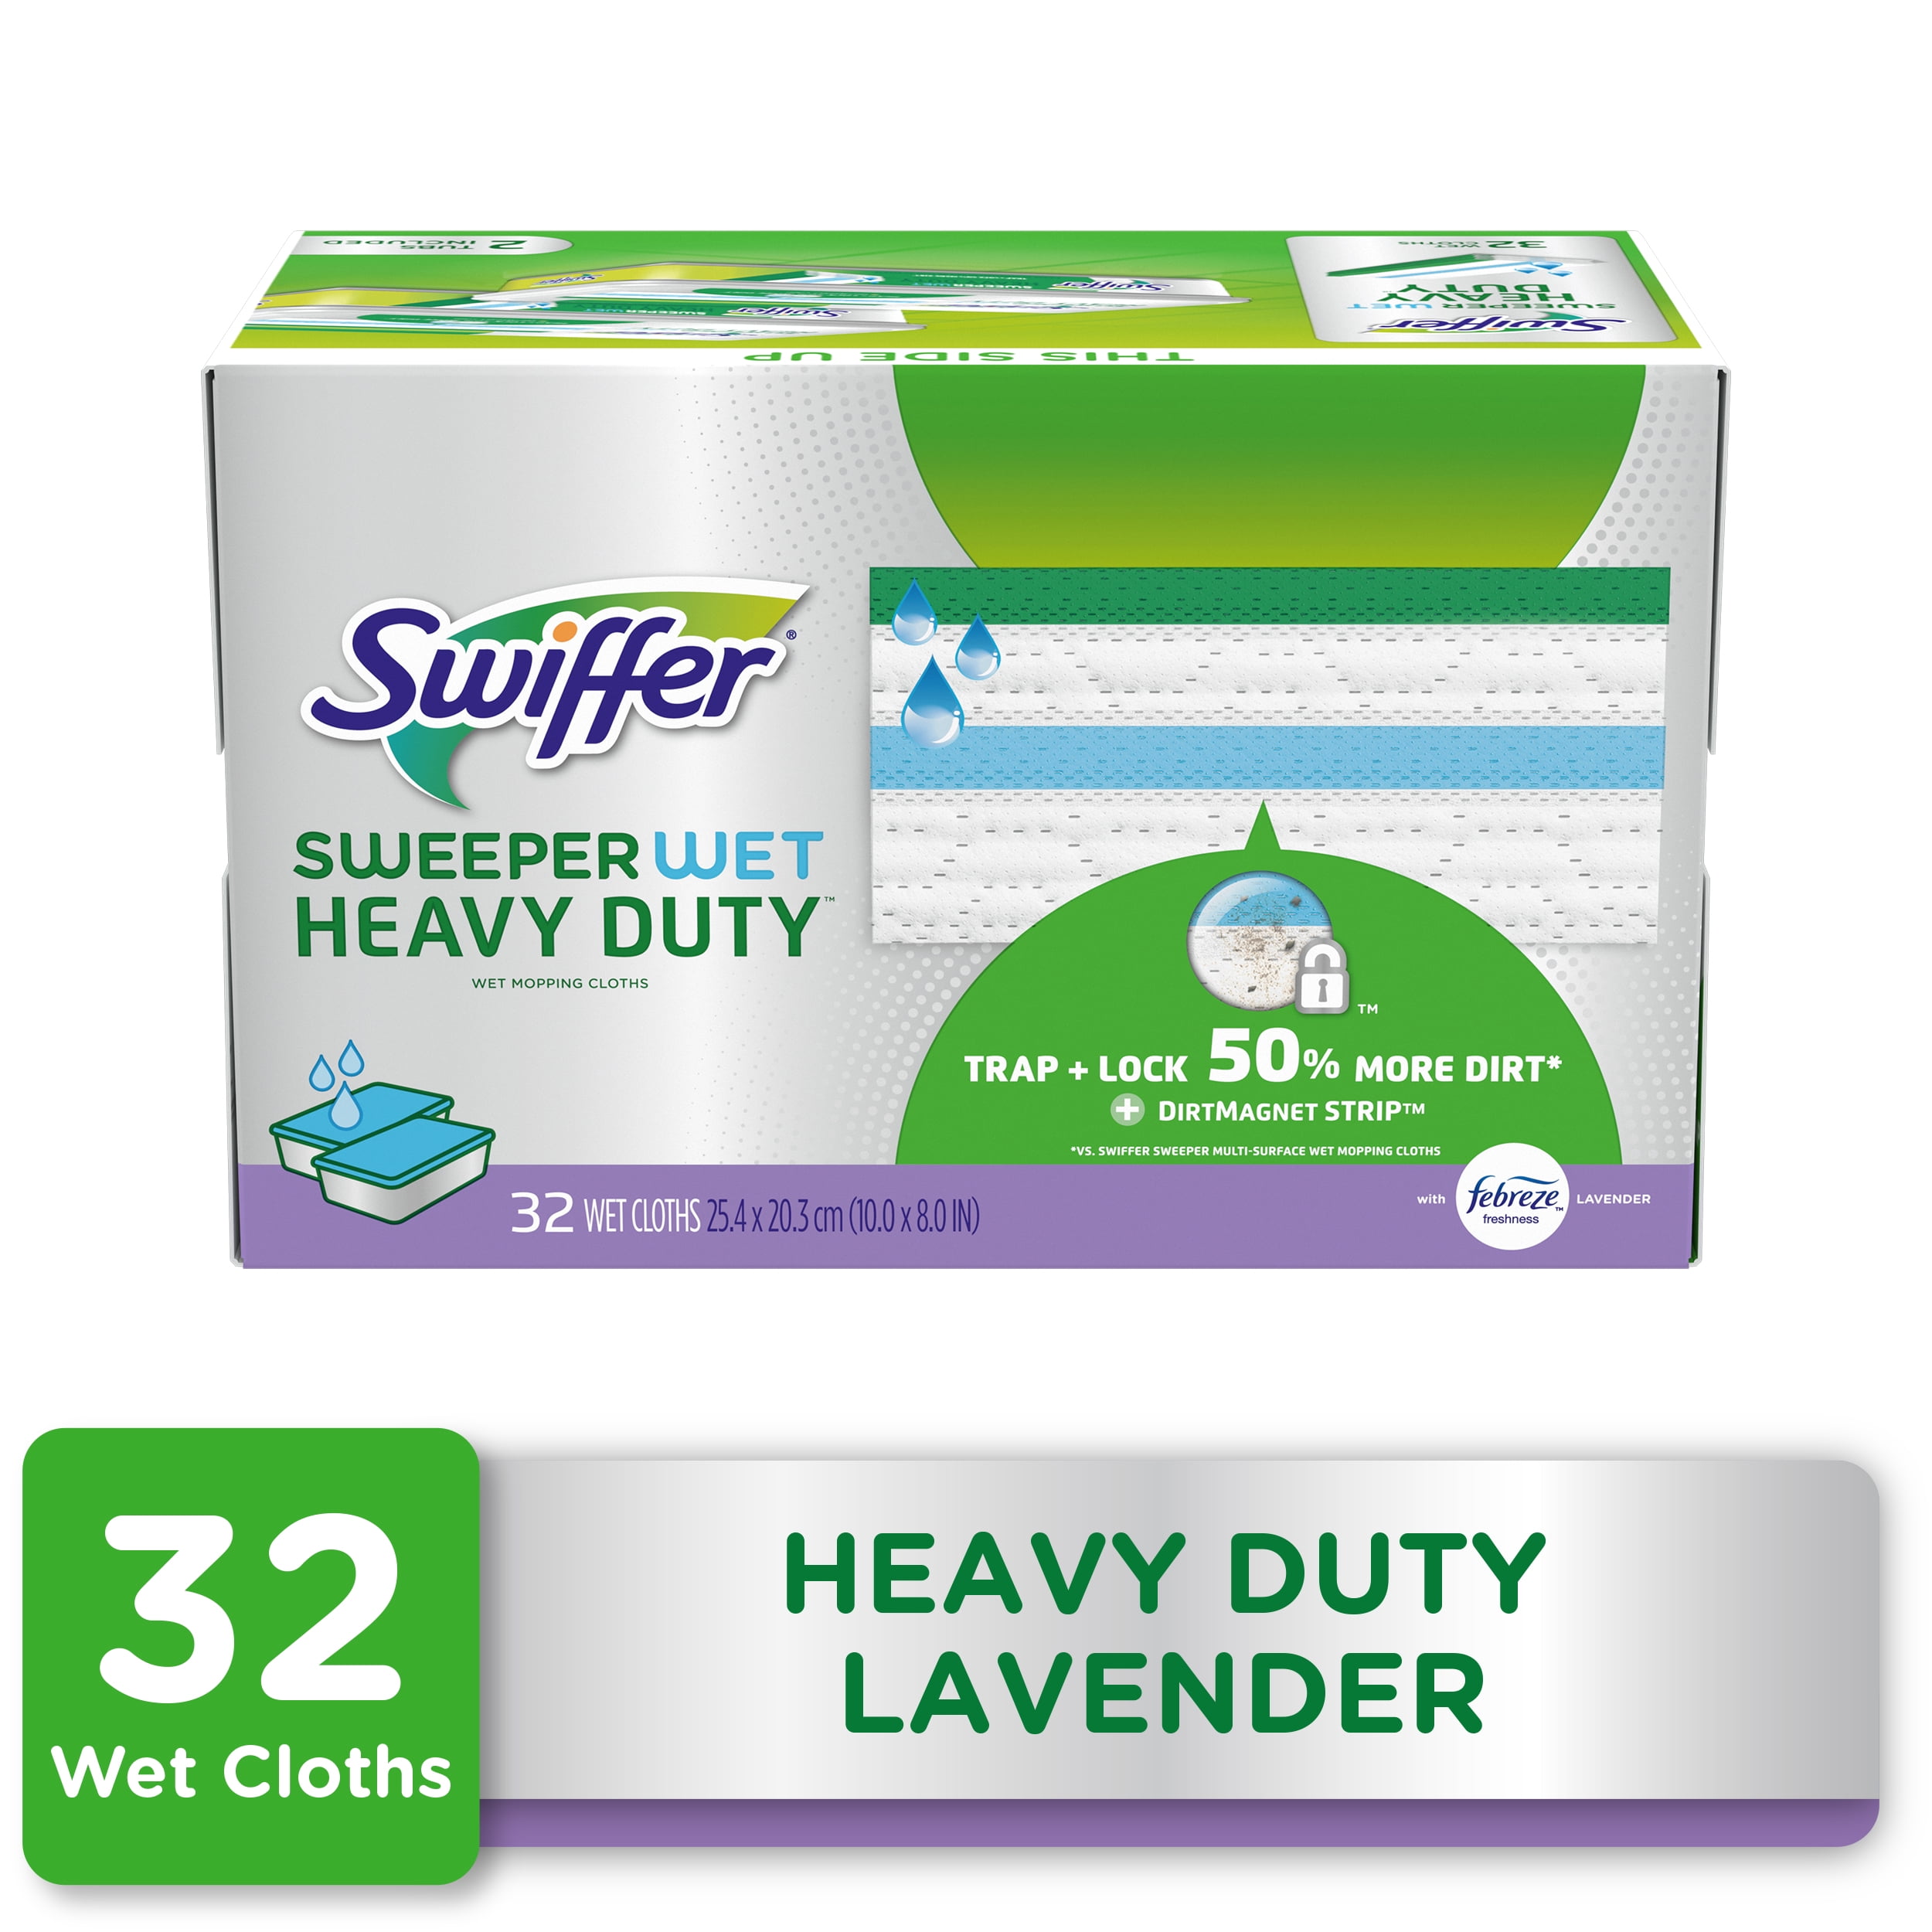 Swiffer Sweeper Heavy Duty Wet Pad Refills, Lavender Scent, 32 Ct